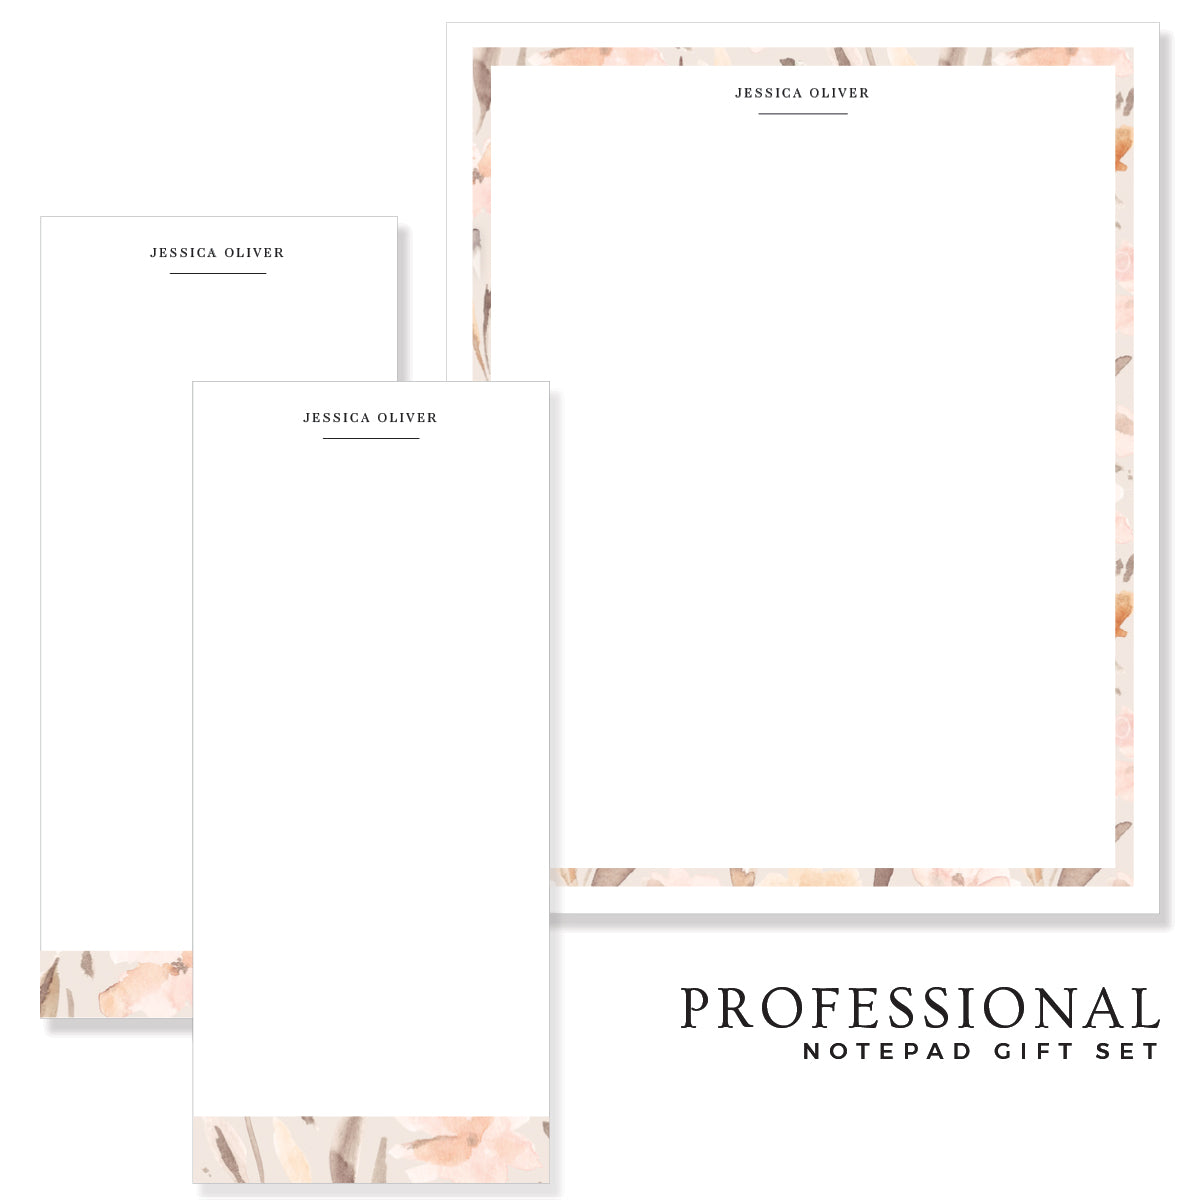 Painted Floral Customized Notepads, RSVP-Style - RSVP Style